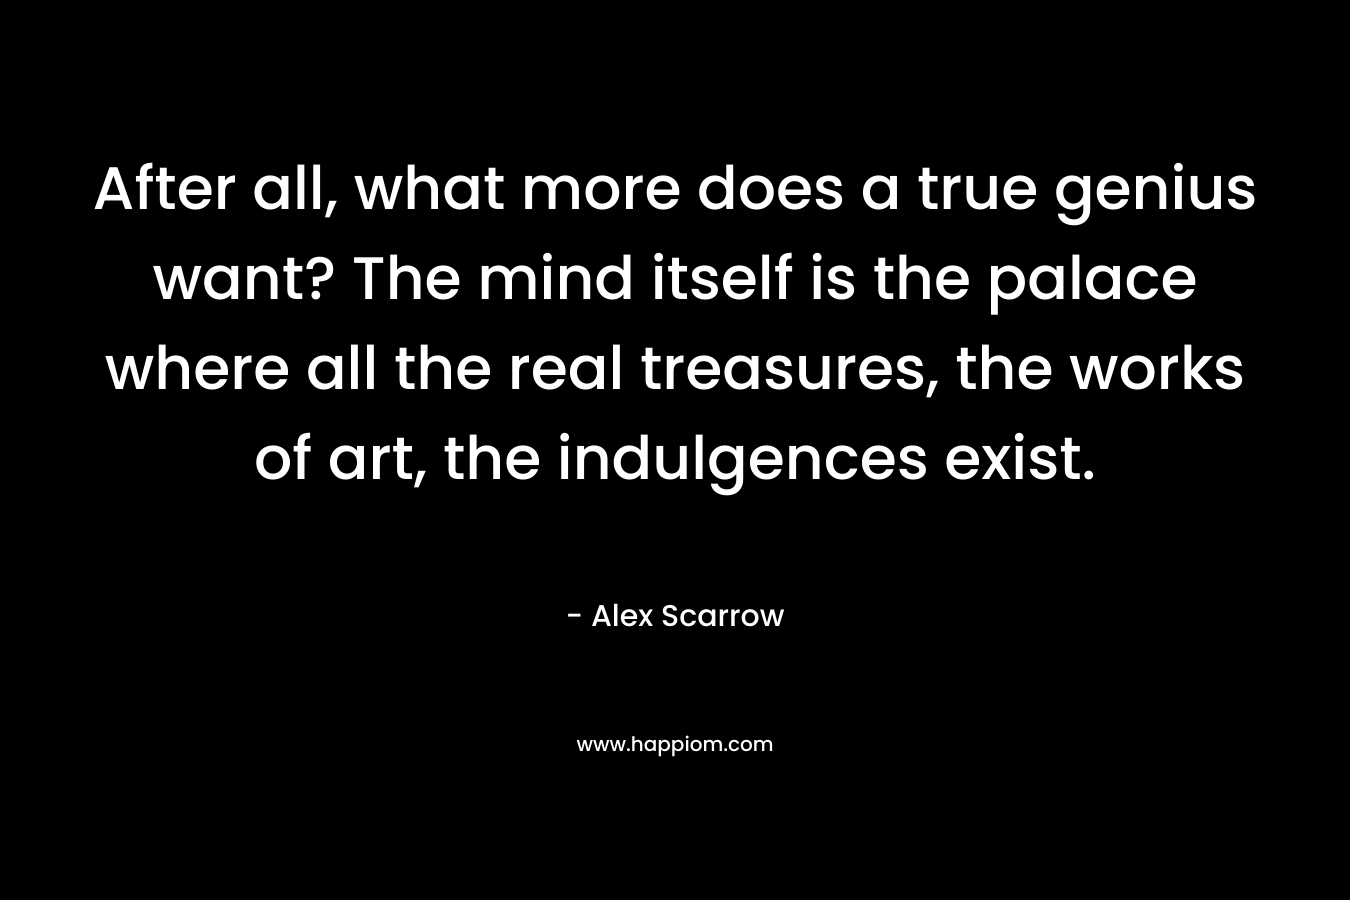 After all, what more does a true genius want? The mind itself is the palace where all the real treasures, the works of art, the indulgences exist.